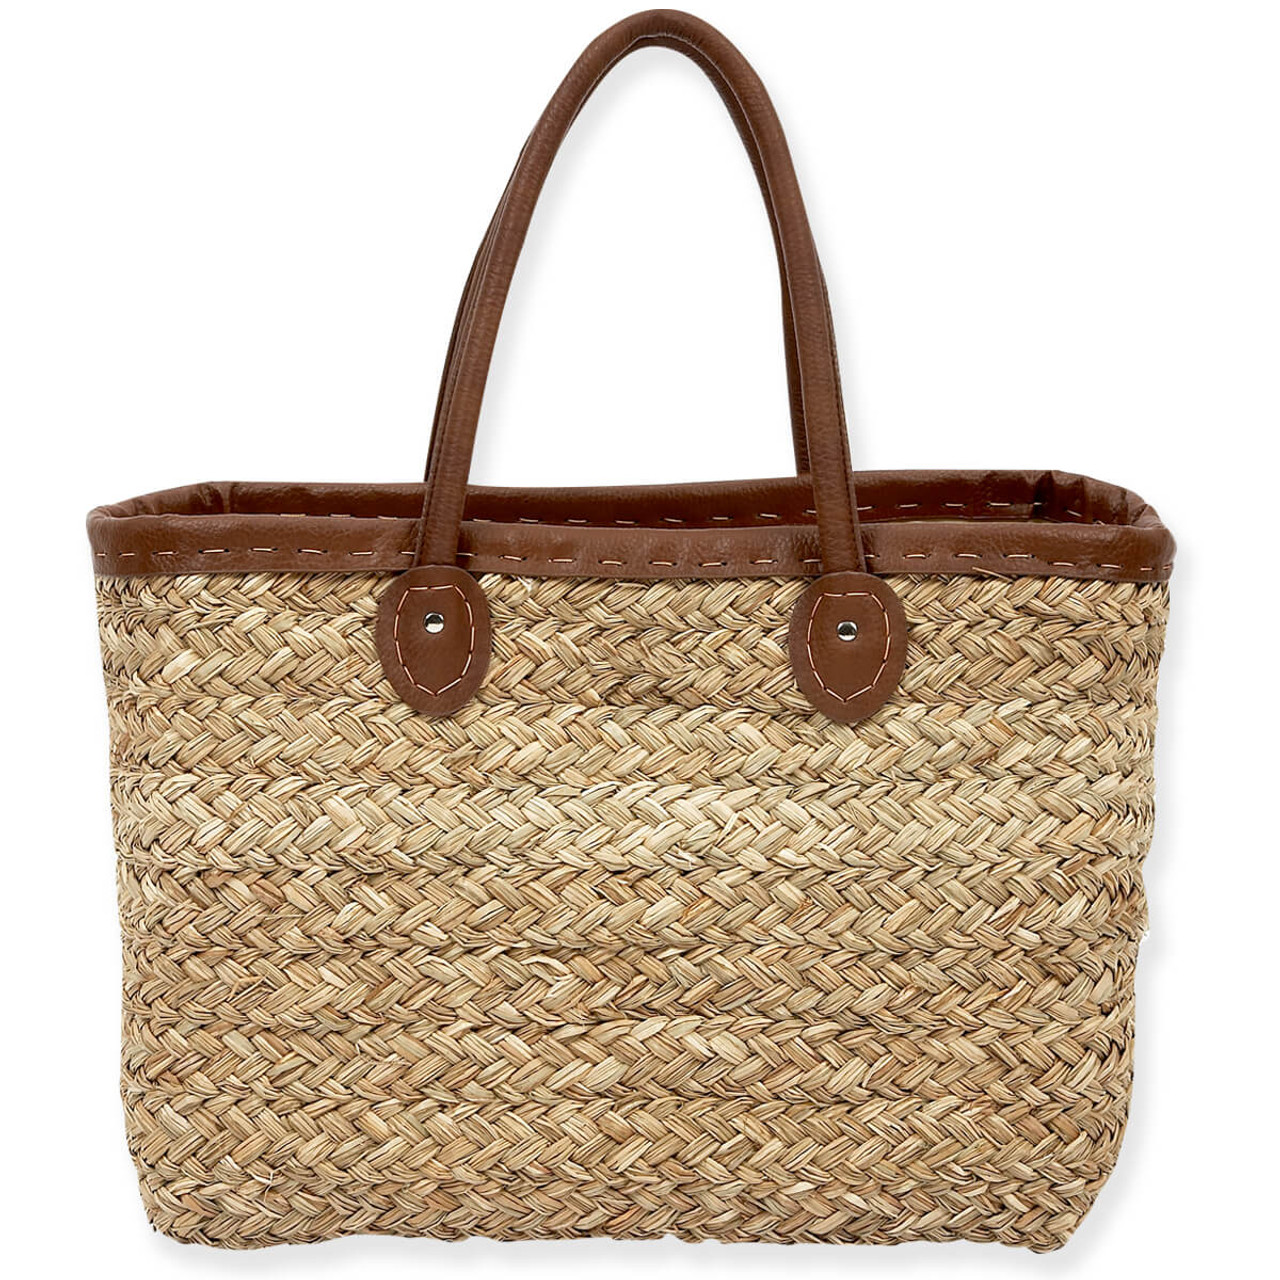 Sun 'N' Sand Accessories Offers Unique And Quality Handbags and Beach Totes